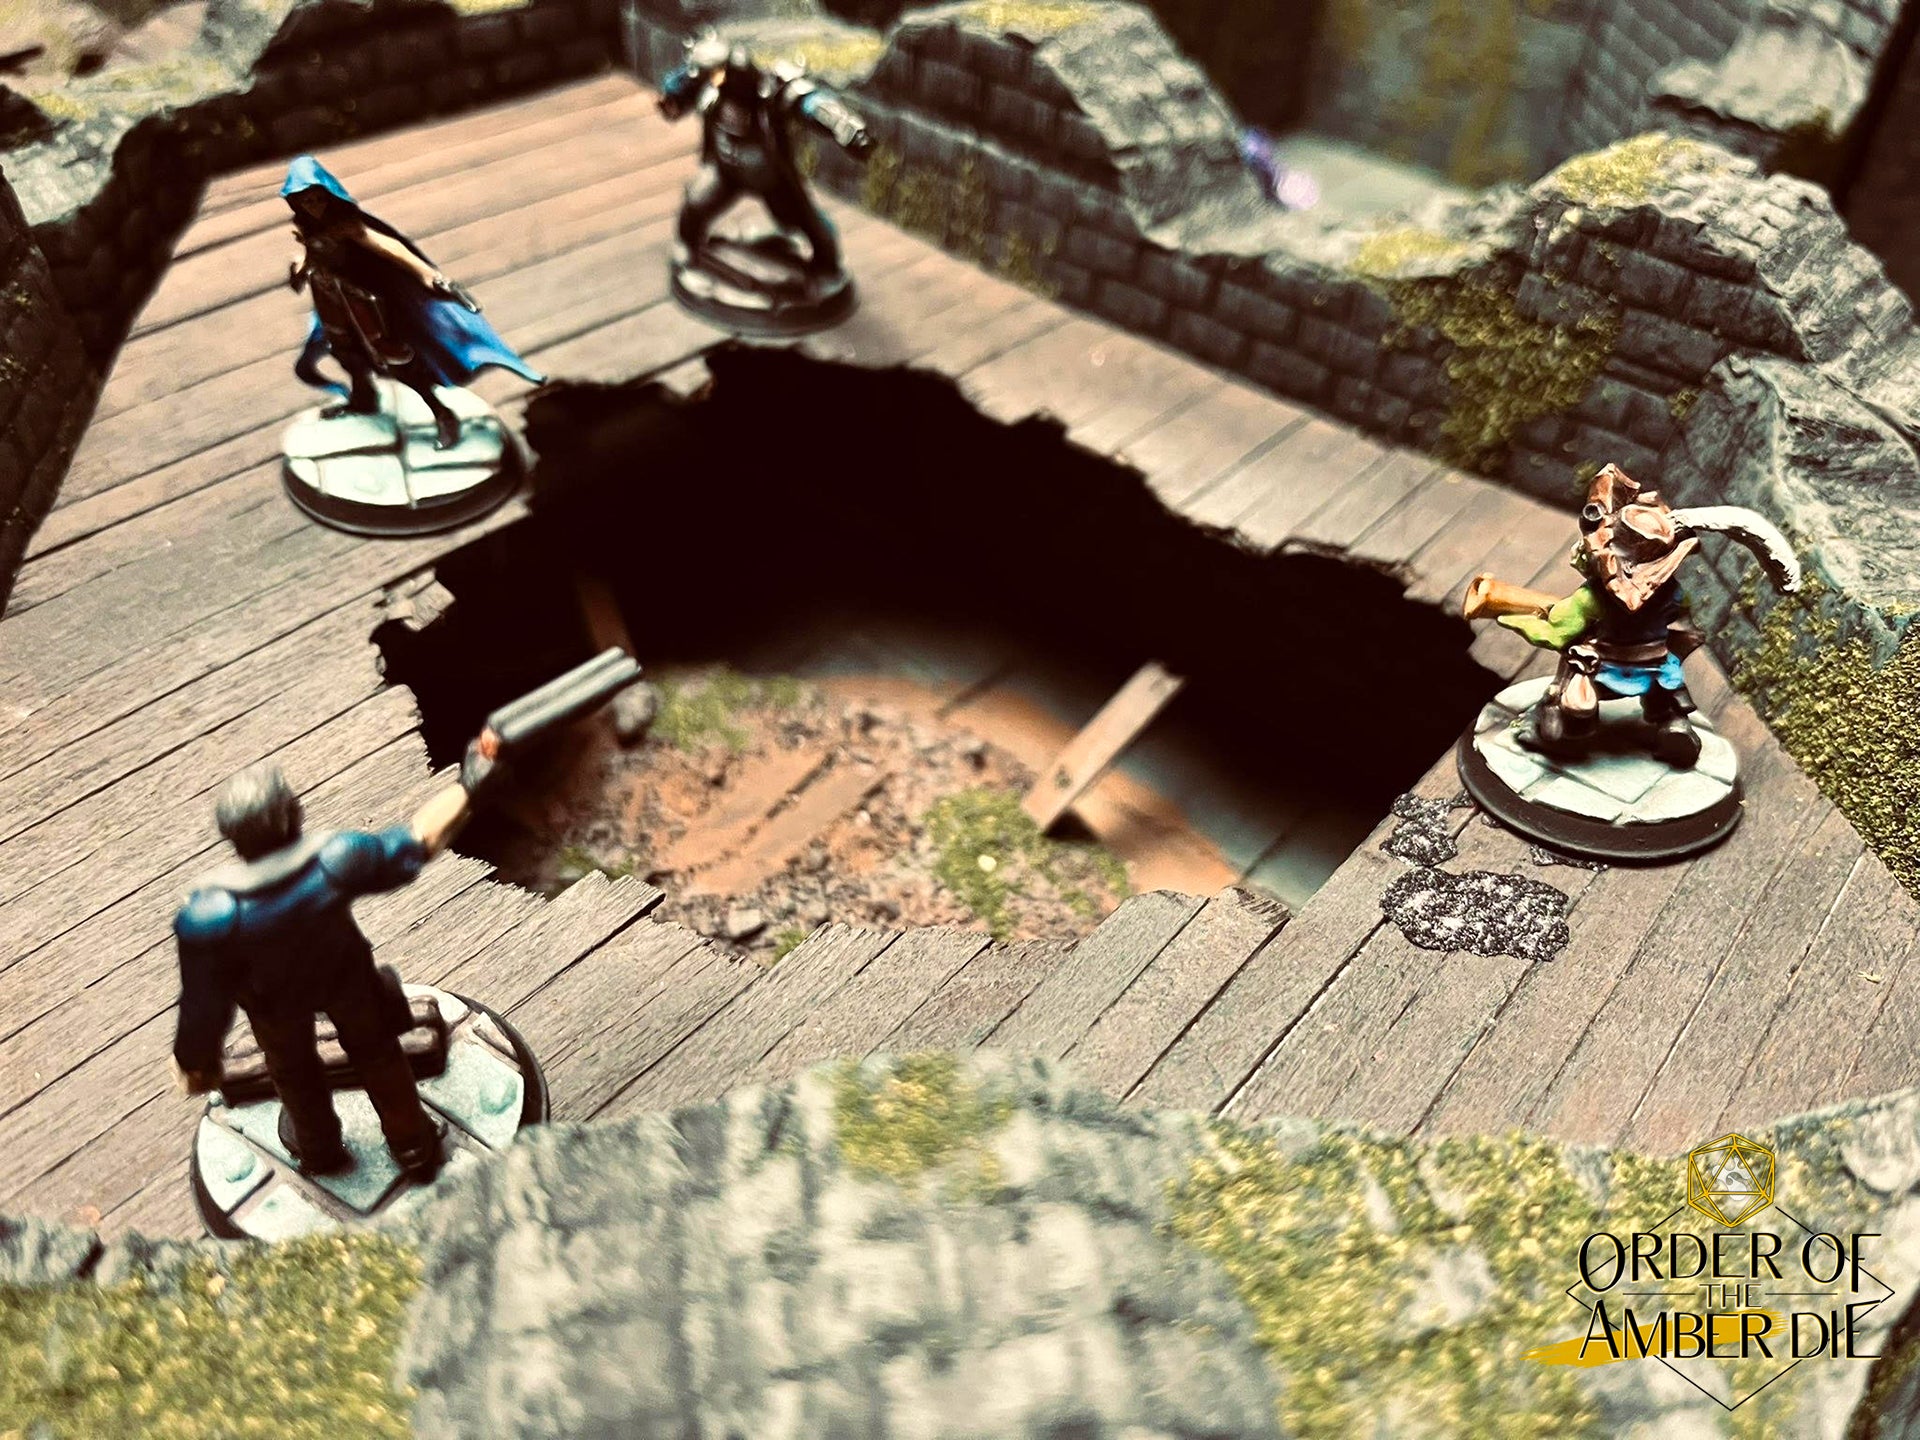 Order of the Amber Die: A top down view of four mini figures standing on a wooden platform looking into a hole that leads deeper into the ruins they're investigating